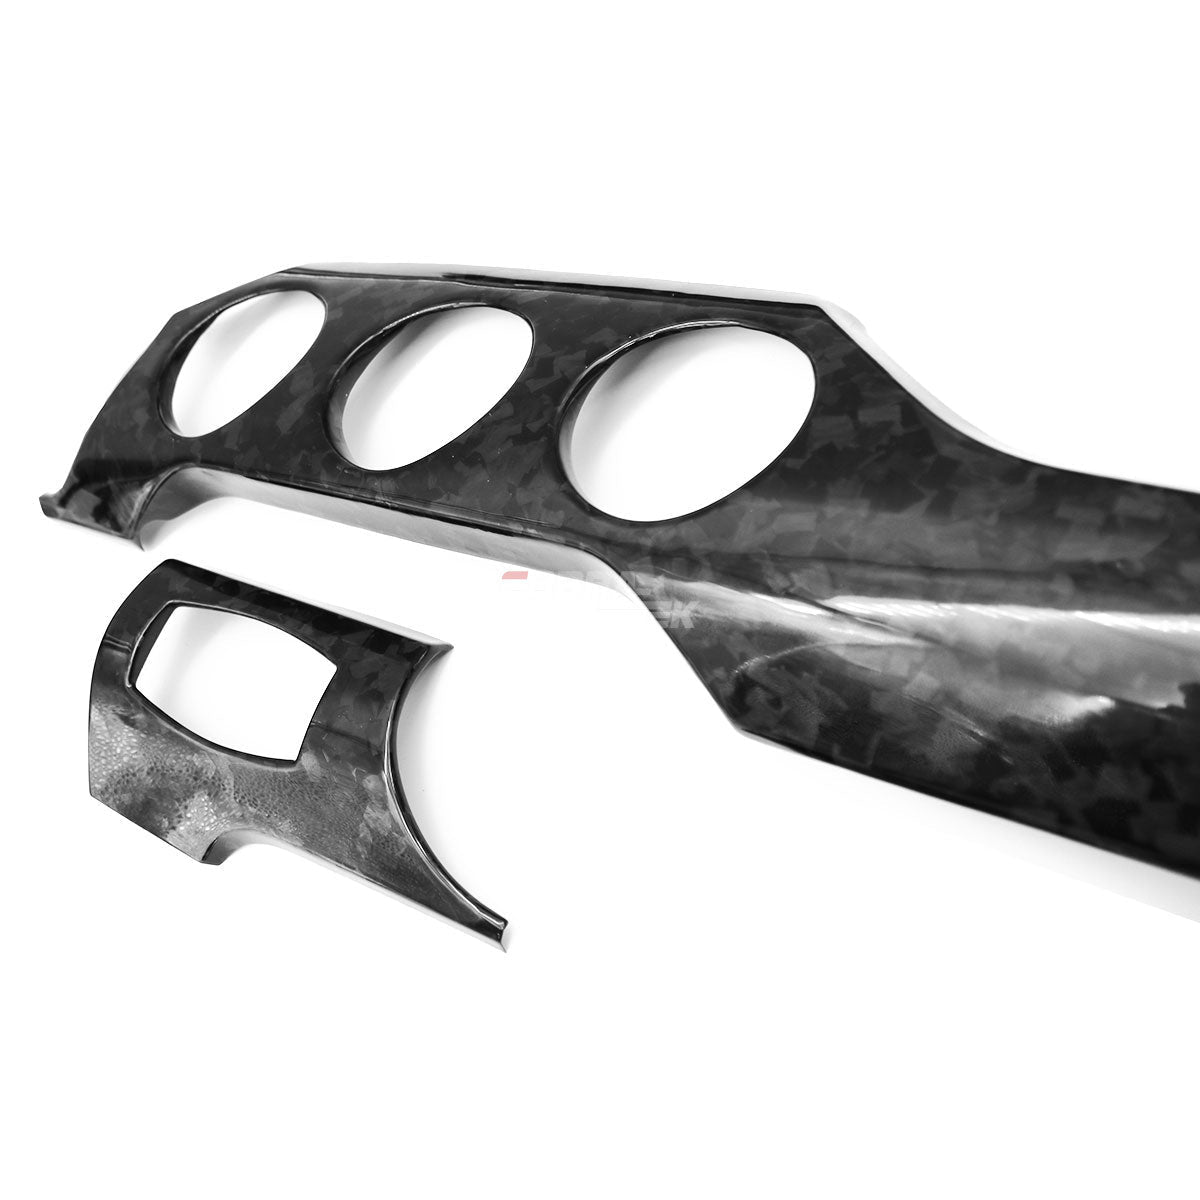 2015-2022 Ford s550 Mustang - Real Carbon Fiber Dashboard 2 PC Interior Performance Pack (3 Holes) - Forged Carbon Fiber